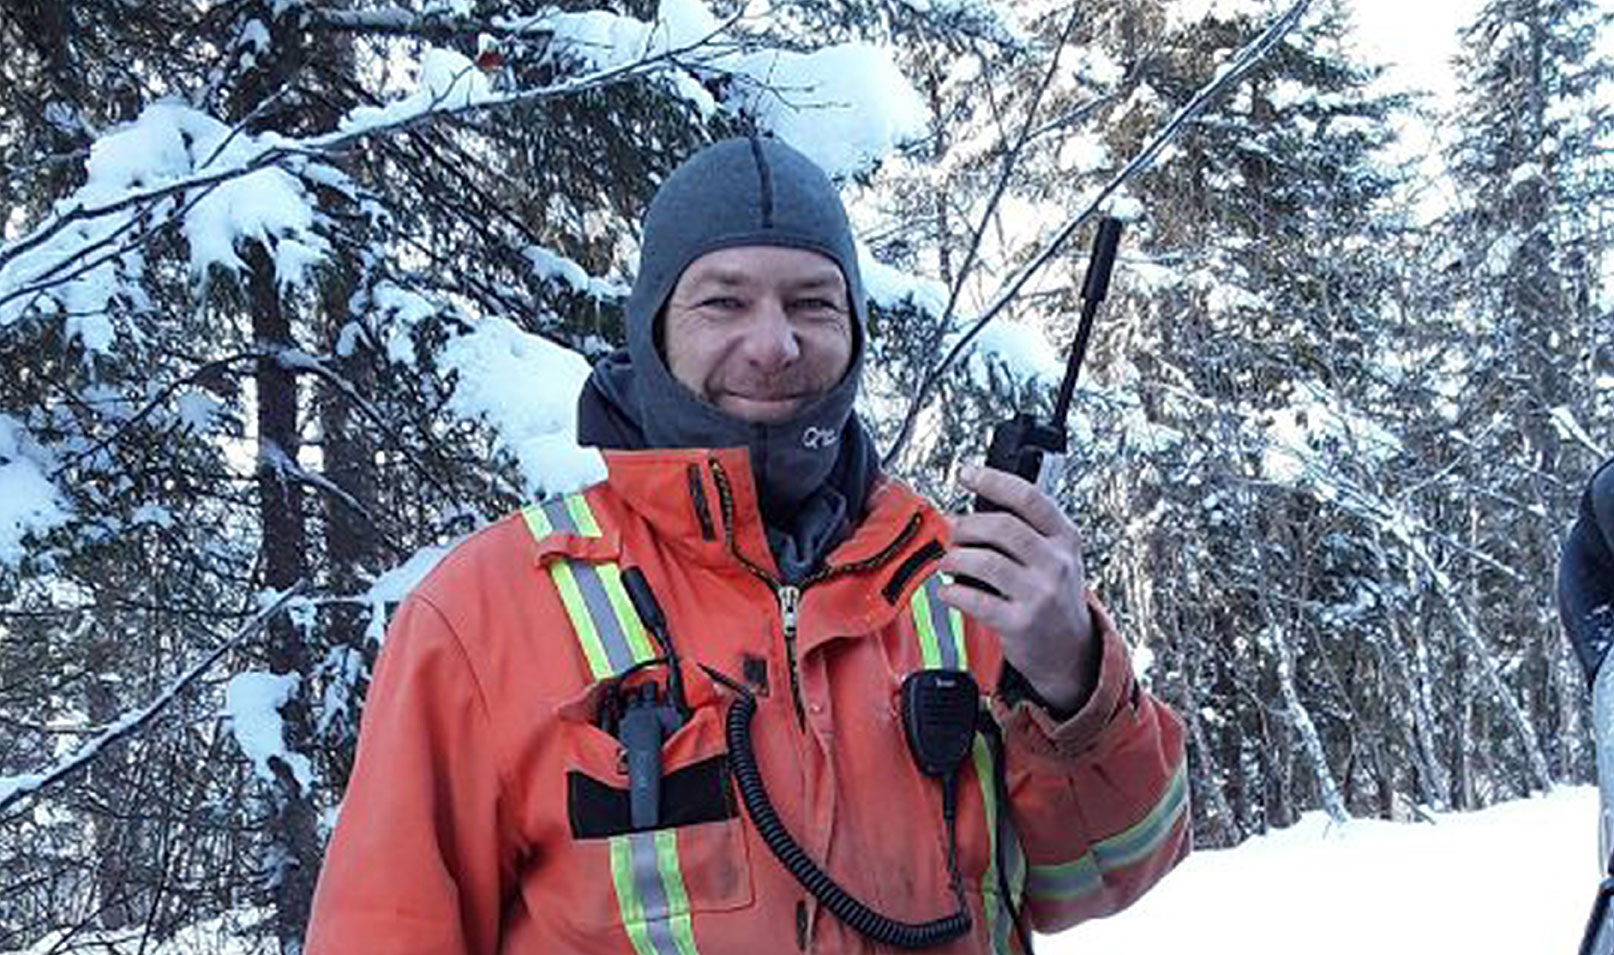 Remote utility worker from Hydro Québec uses an Iridium PTT radio to stay connected during utility line construction